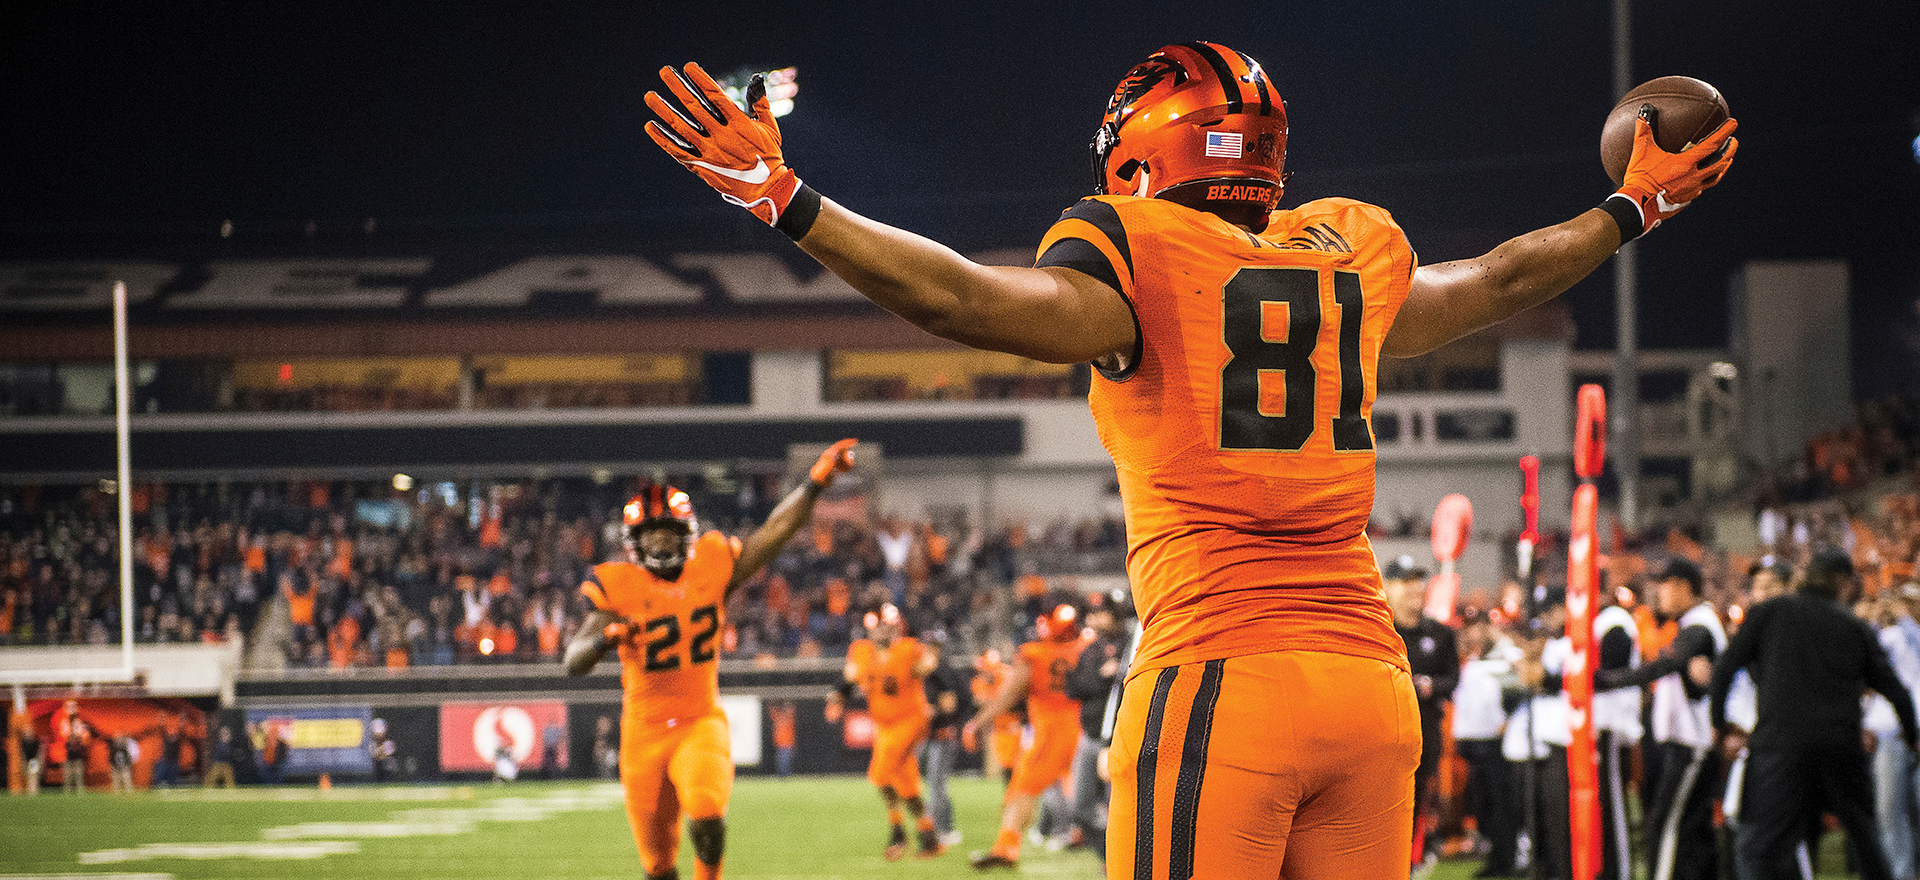 Football player on a football field during a game in orange jersey with back facing camera. His arms are raised up and it's night time.